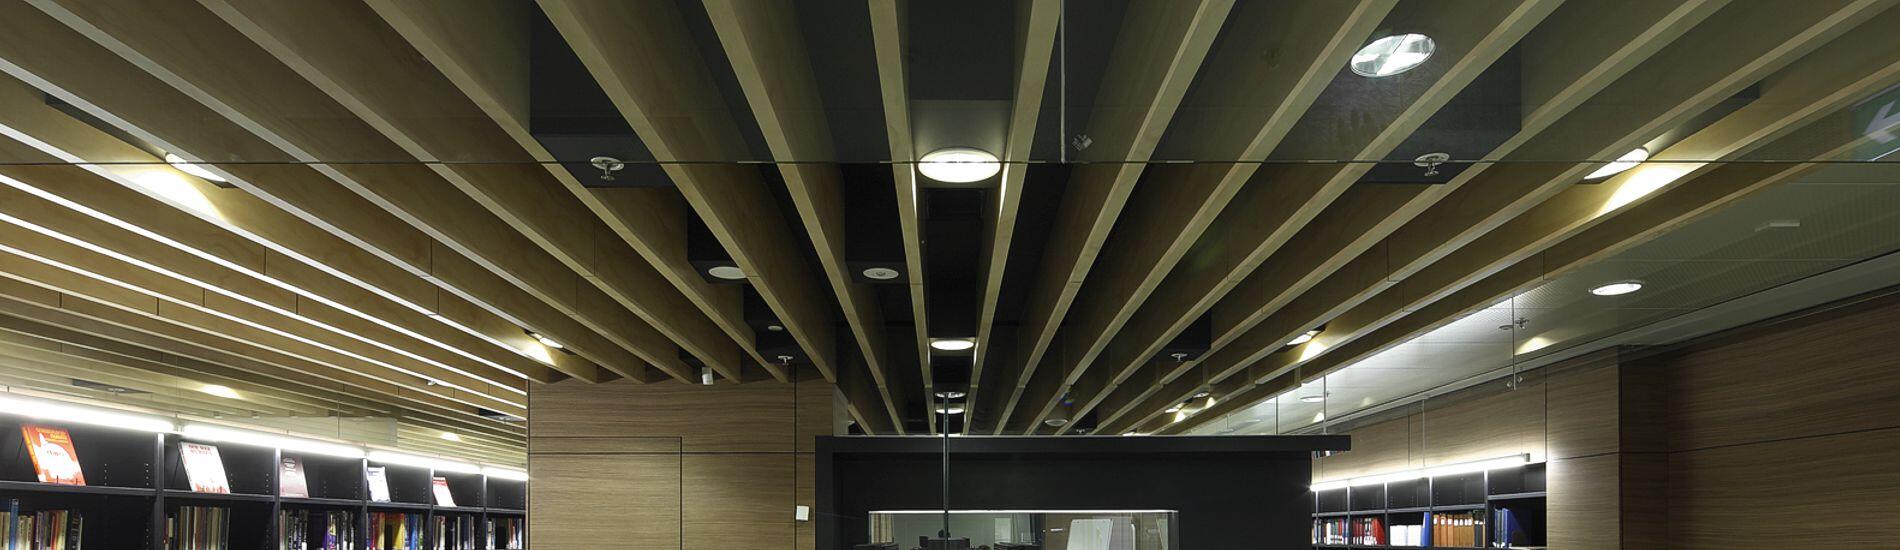 Lightweight MAXI BEAM feature ceiling in hospital clinical school library